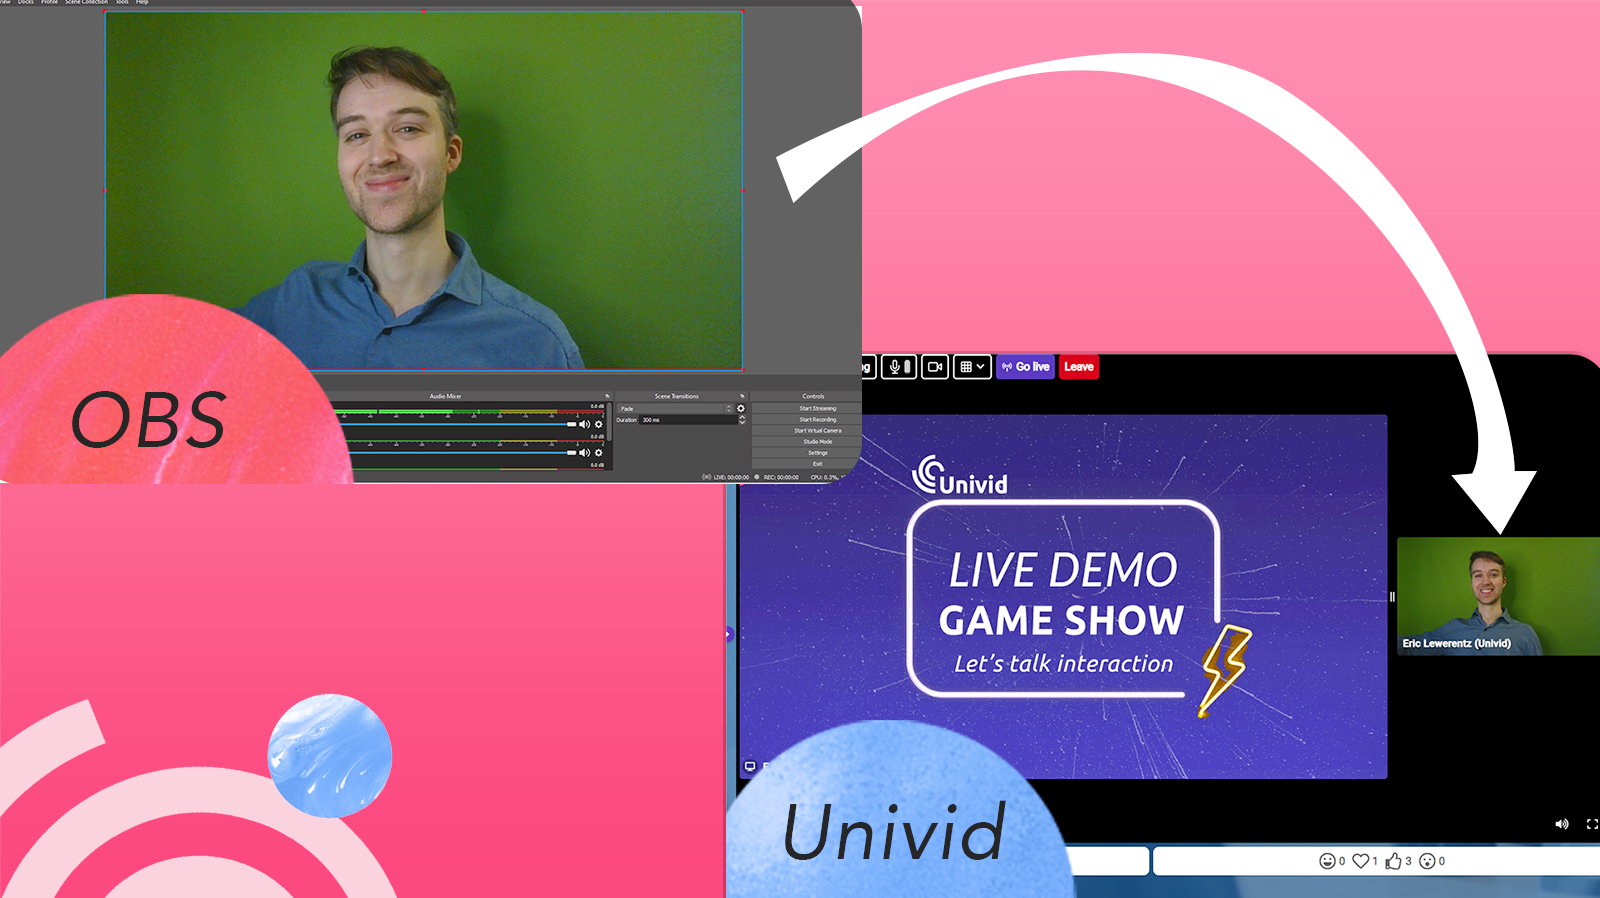 OBS, also called Open Broadcaster Software, is an excellent tool to get high production quality and full control of your live broadcasts. It is easy to live stream directly (via RTMP) to different platforms where the viewers are. Univid is super easy to use with OBS - read more about how below.